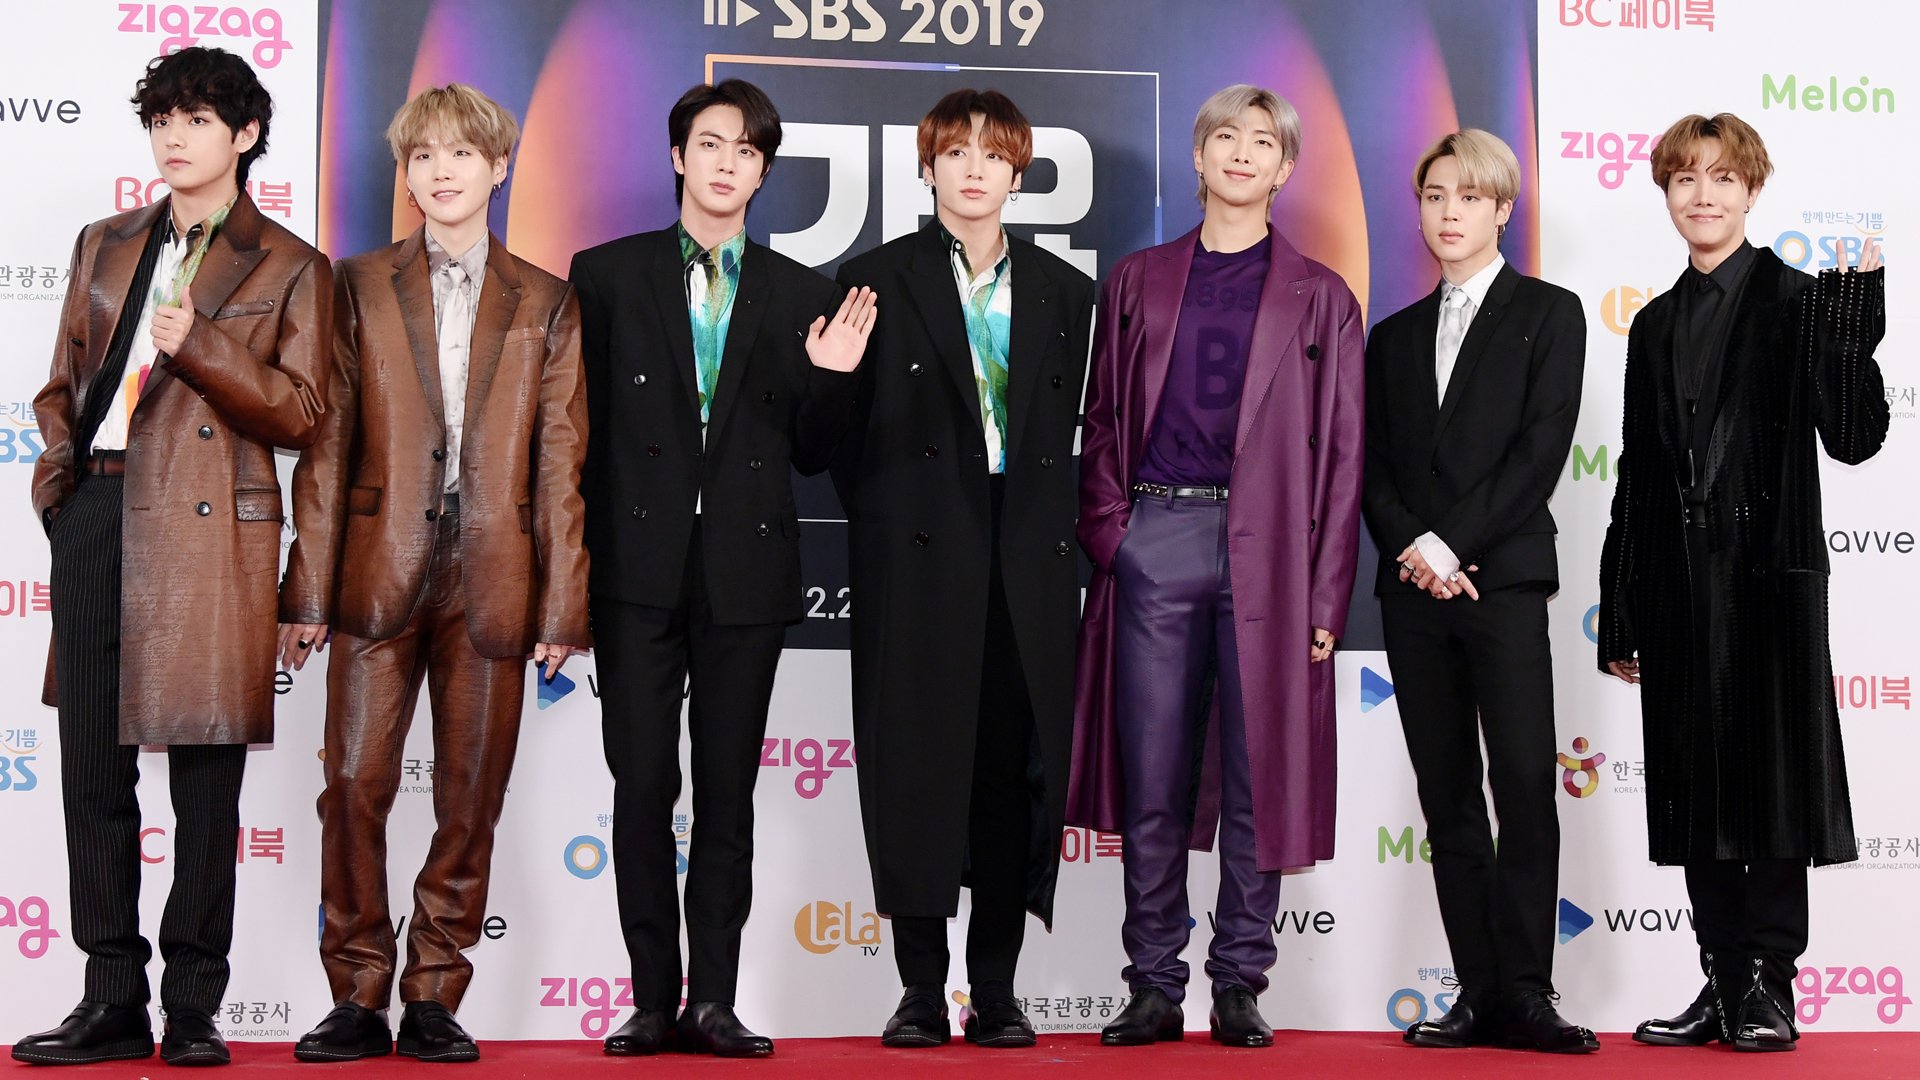 BTS attends 2019 SBS Gayo Daejeon Photocall at Gocheok Sky Dome on December 25, 2019 in Seoul, South Korea.